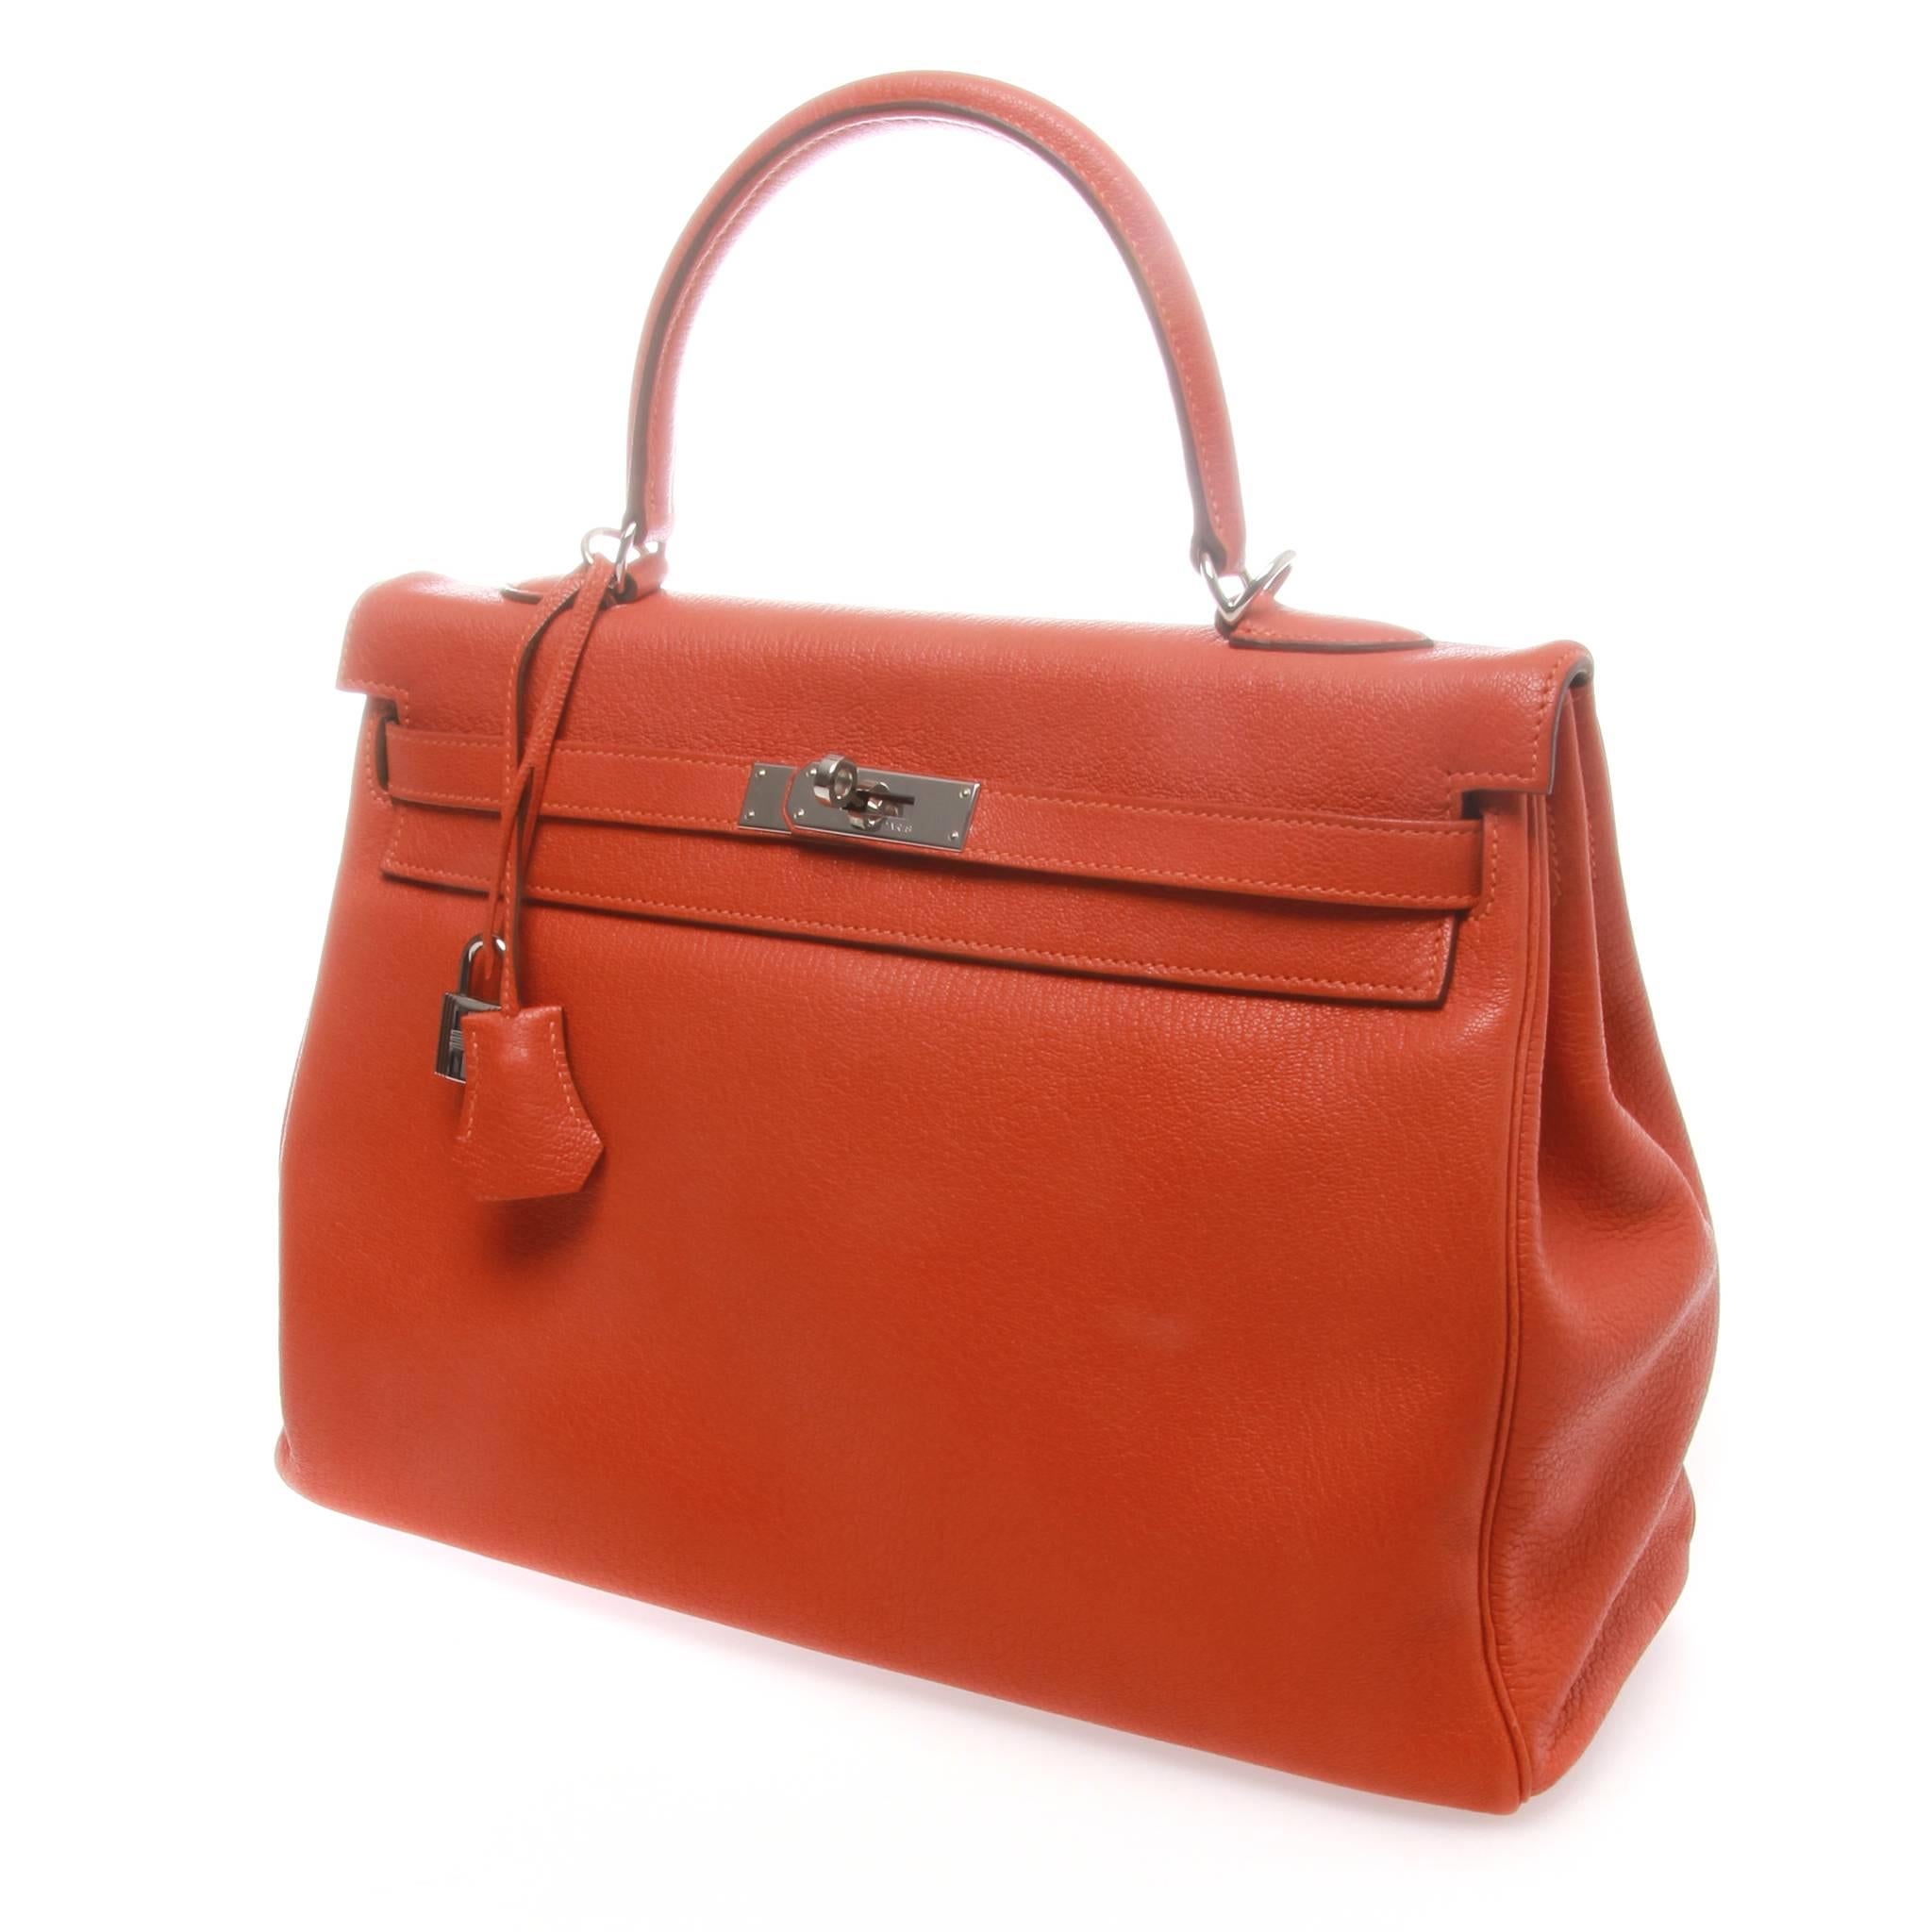 Orange Chevre Mysore leather Hermès Kelly Retourne 35 with palladium hardware, optional shoulder strap, single flat top handle, tonal leather interior, three pockets at interior walls; one with zip closure and flap with turn-lock closure at front.